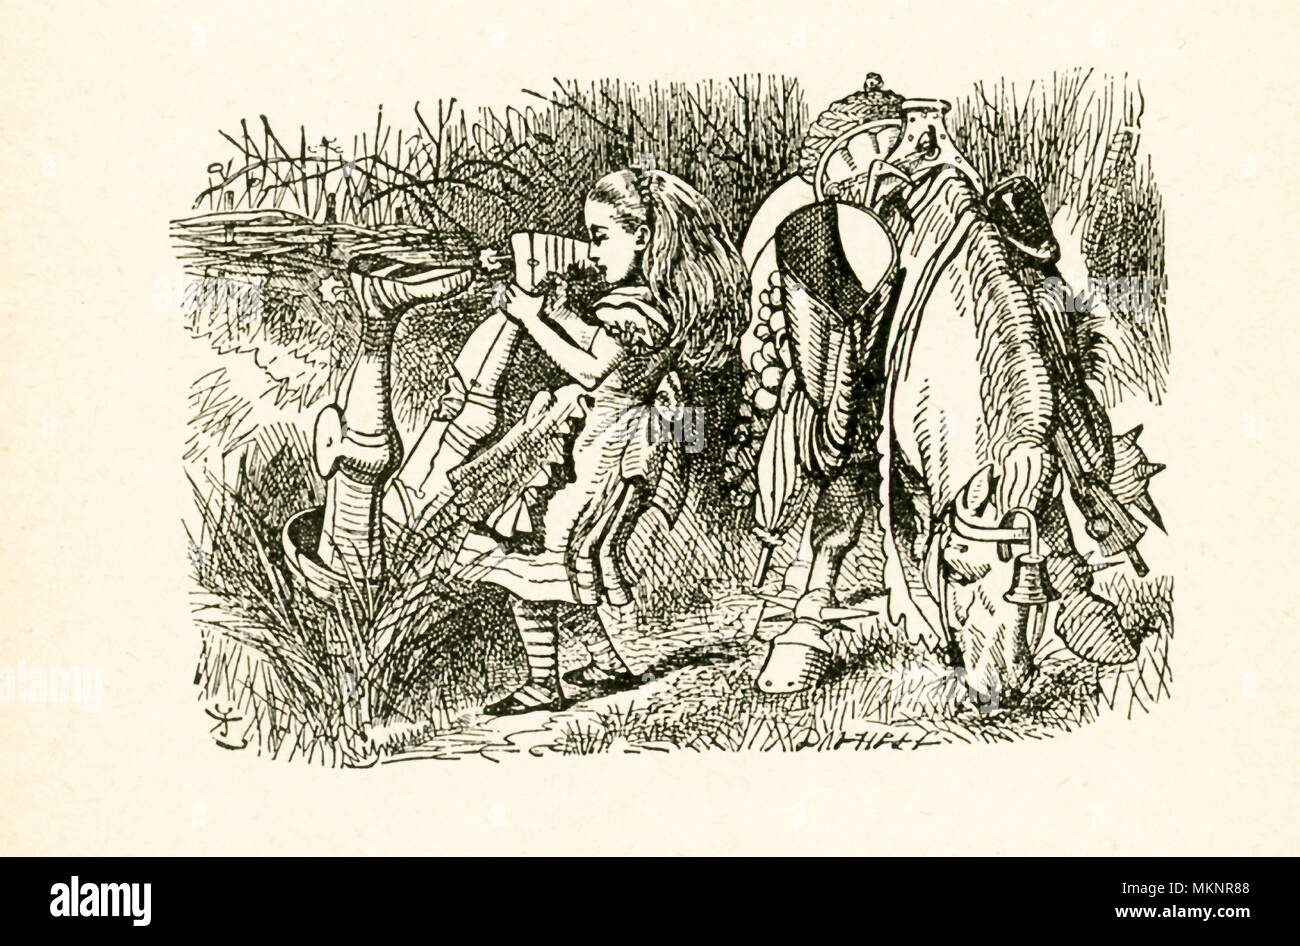 This illustration of Alice and the White Knight with his horse in ditch is from 'Through the Looking-Glass and What Alice Found There' by Lewis Carroll (Charles Lutwidge Dodgson), who wrote this novel in 1871 as a sequel to 'Alice's Adventures in Wonderland.' Here Alice is pulling the White Knight from the ditch. Stock Photo